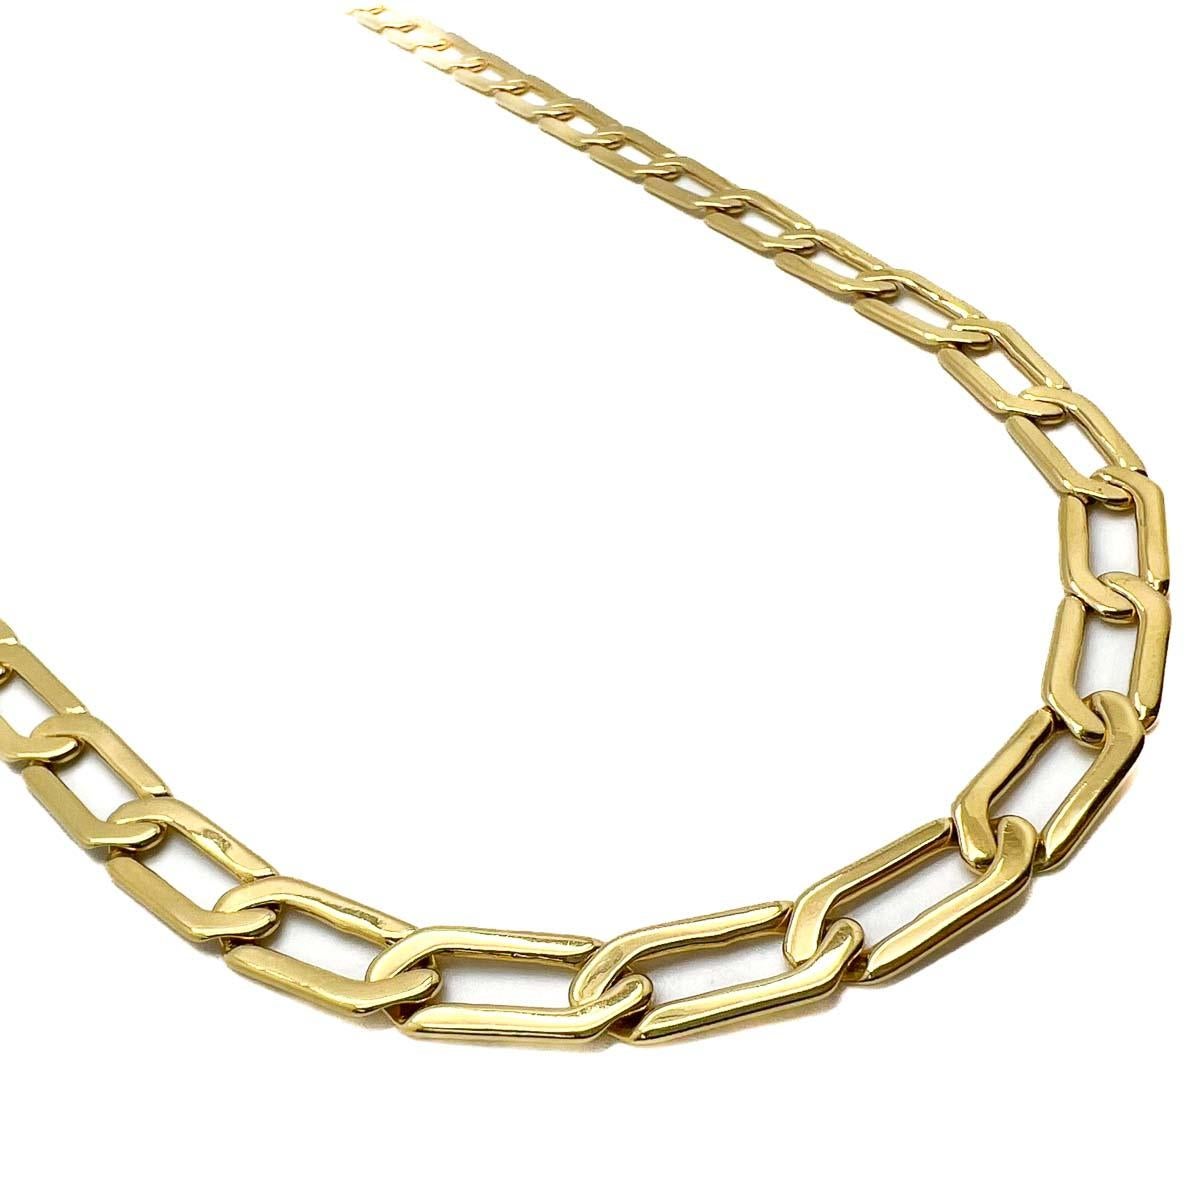 A totally timeless Vintage Napier Elongated Link Necklace. Long lustrous links prove the perfect accessory for every look.

American costume jewellery company Napier founded in the 1880s were revered for fashion forward jewels. Adorning some of the